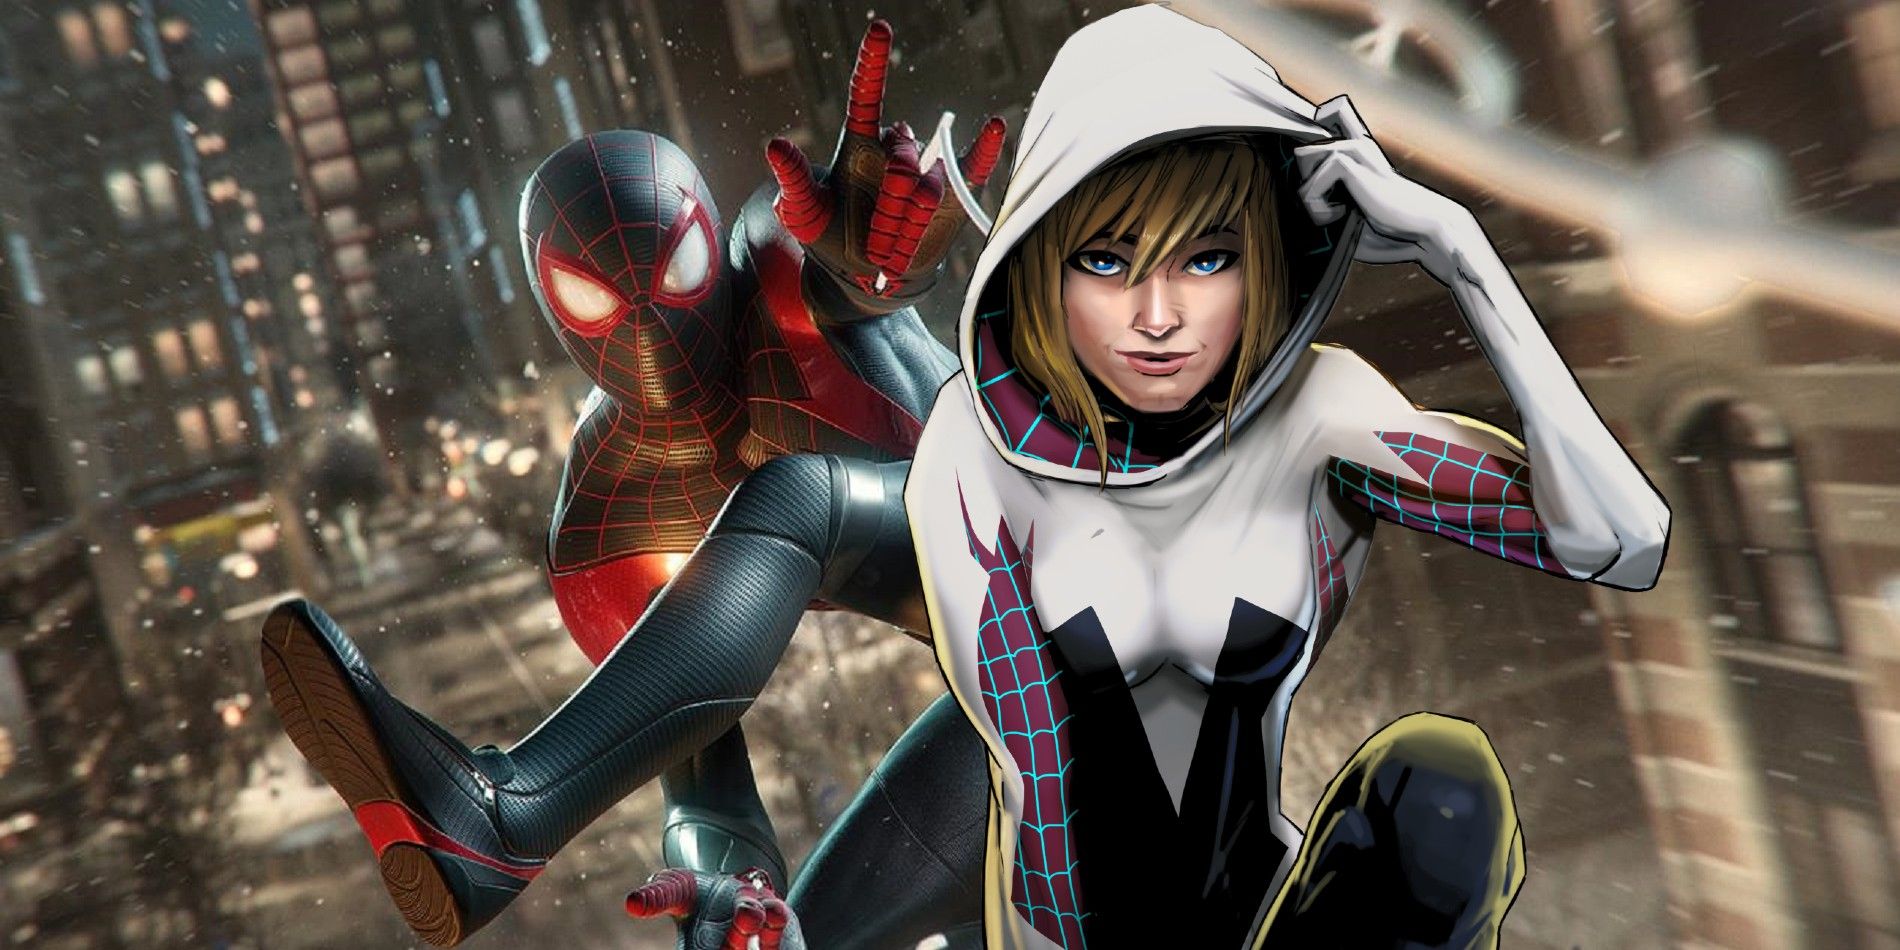 Marvel's Spider-Man 2's Gwen Stacy may not be dead, despite not appearing in the game.